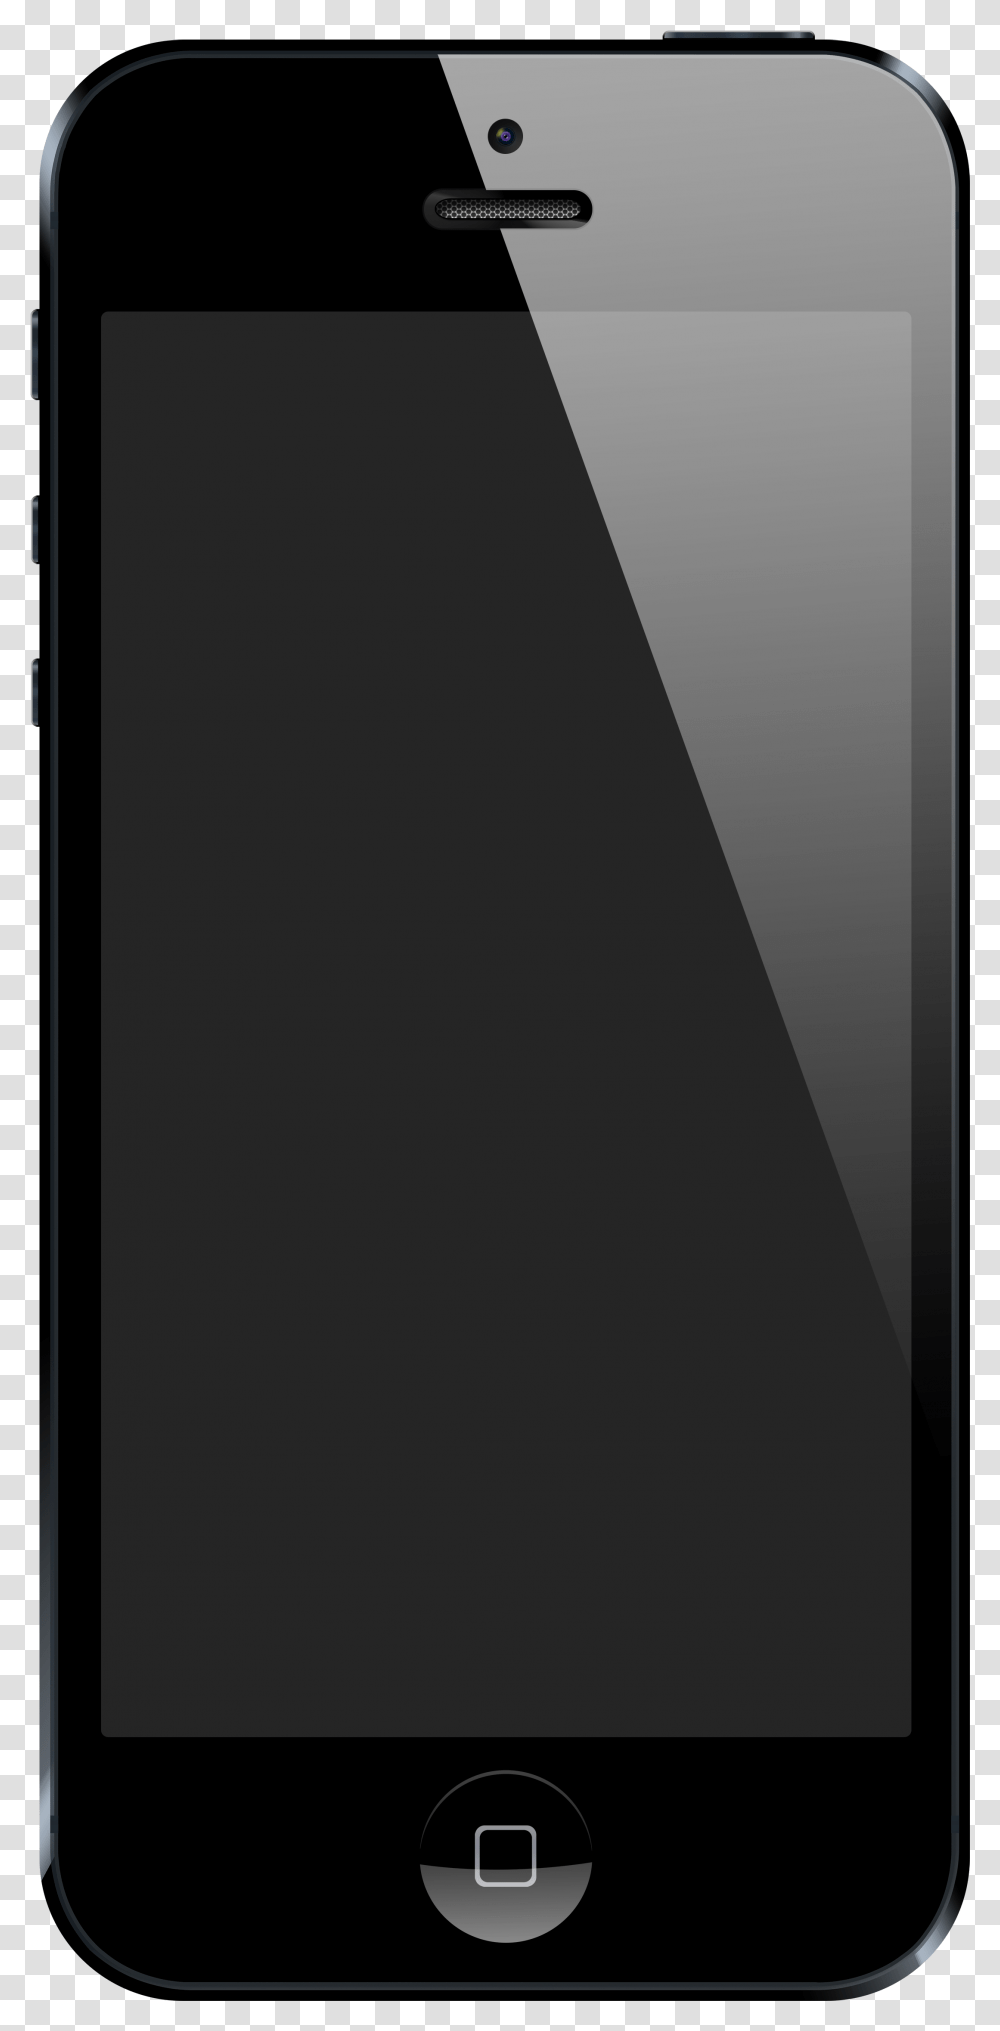 Iphone 5 Template Phones With A Black Screen, Electronics, Mobile Phone, Cell Phone Transparent Png